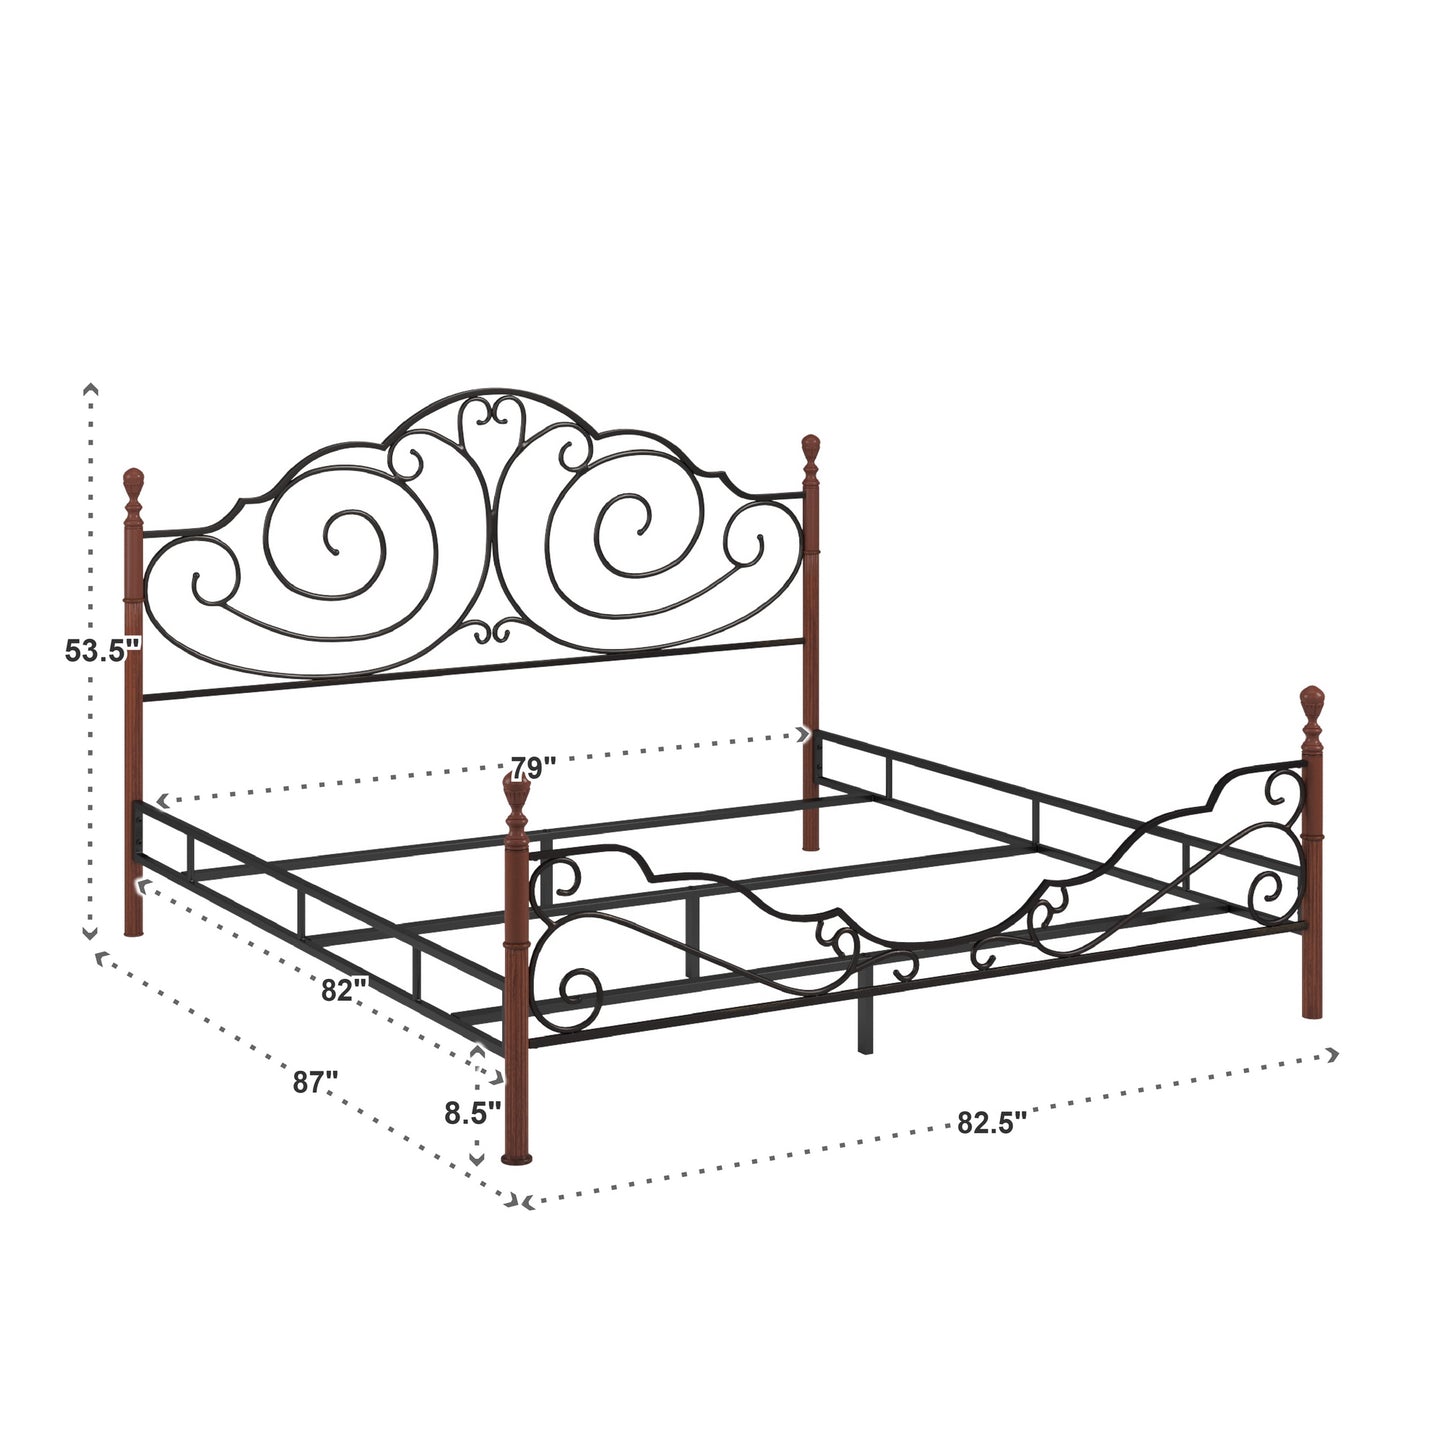 Graceful Scroll Bronze Iron Bed - King